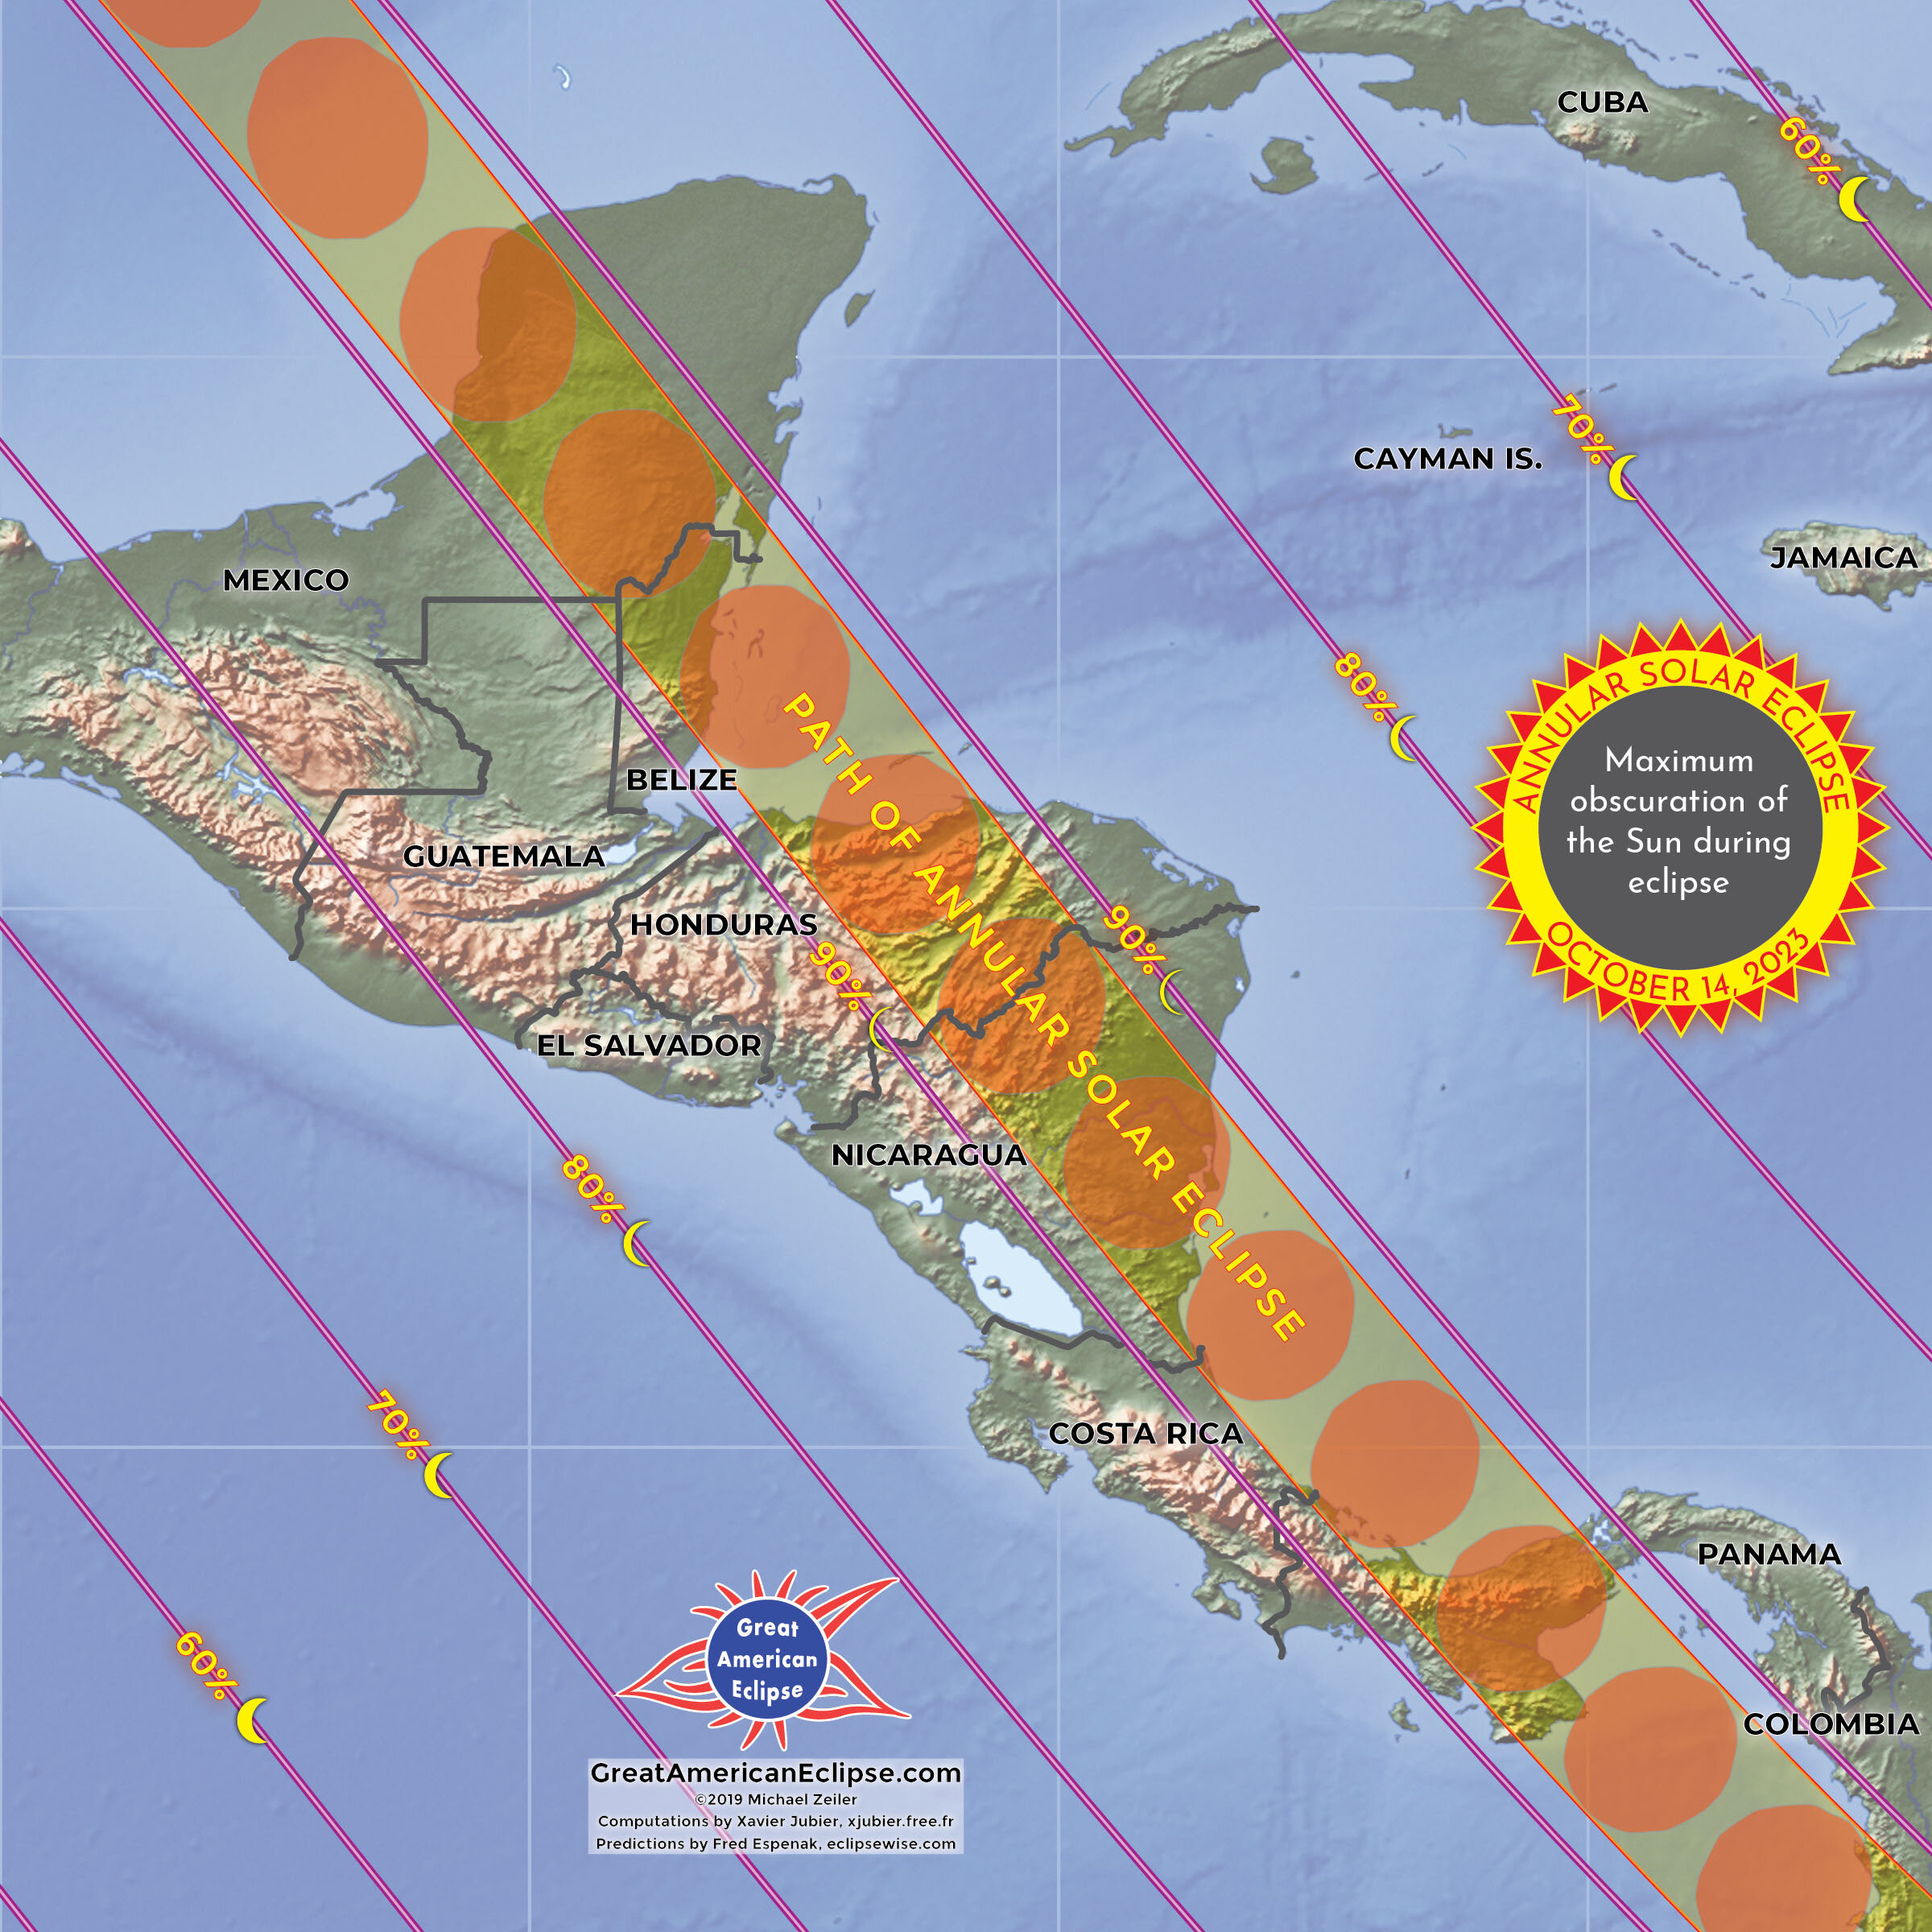 Map of a portion of Mexico and Central America showing the path of the annular solar eclipse.